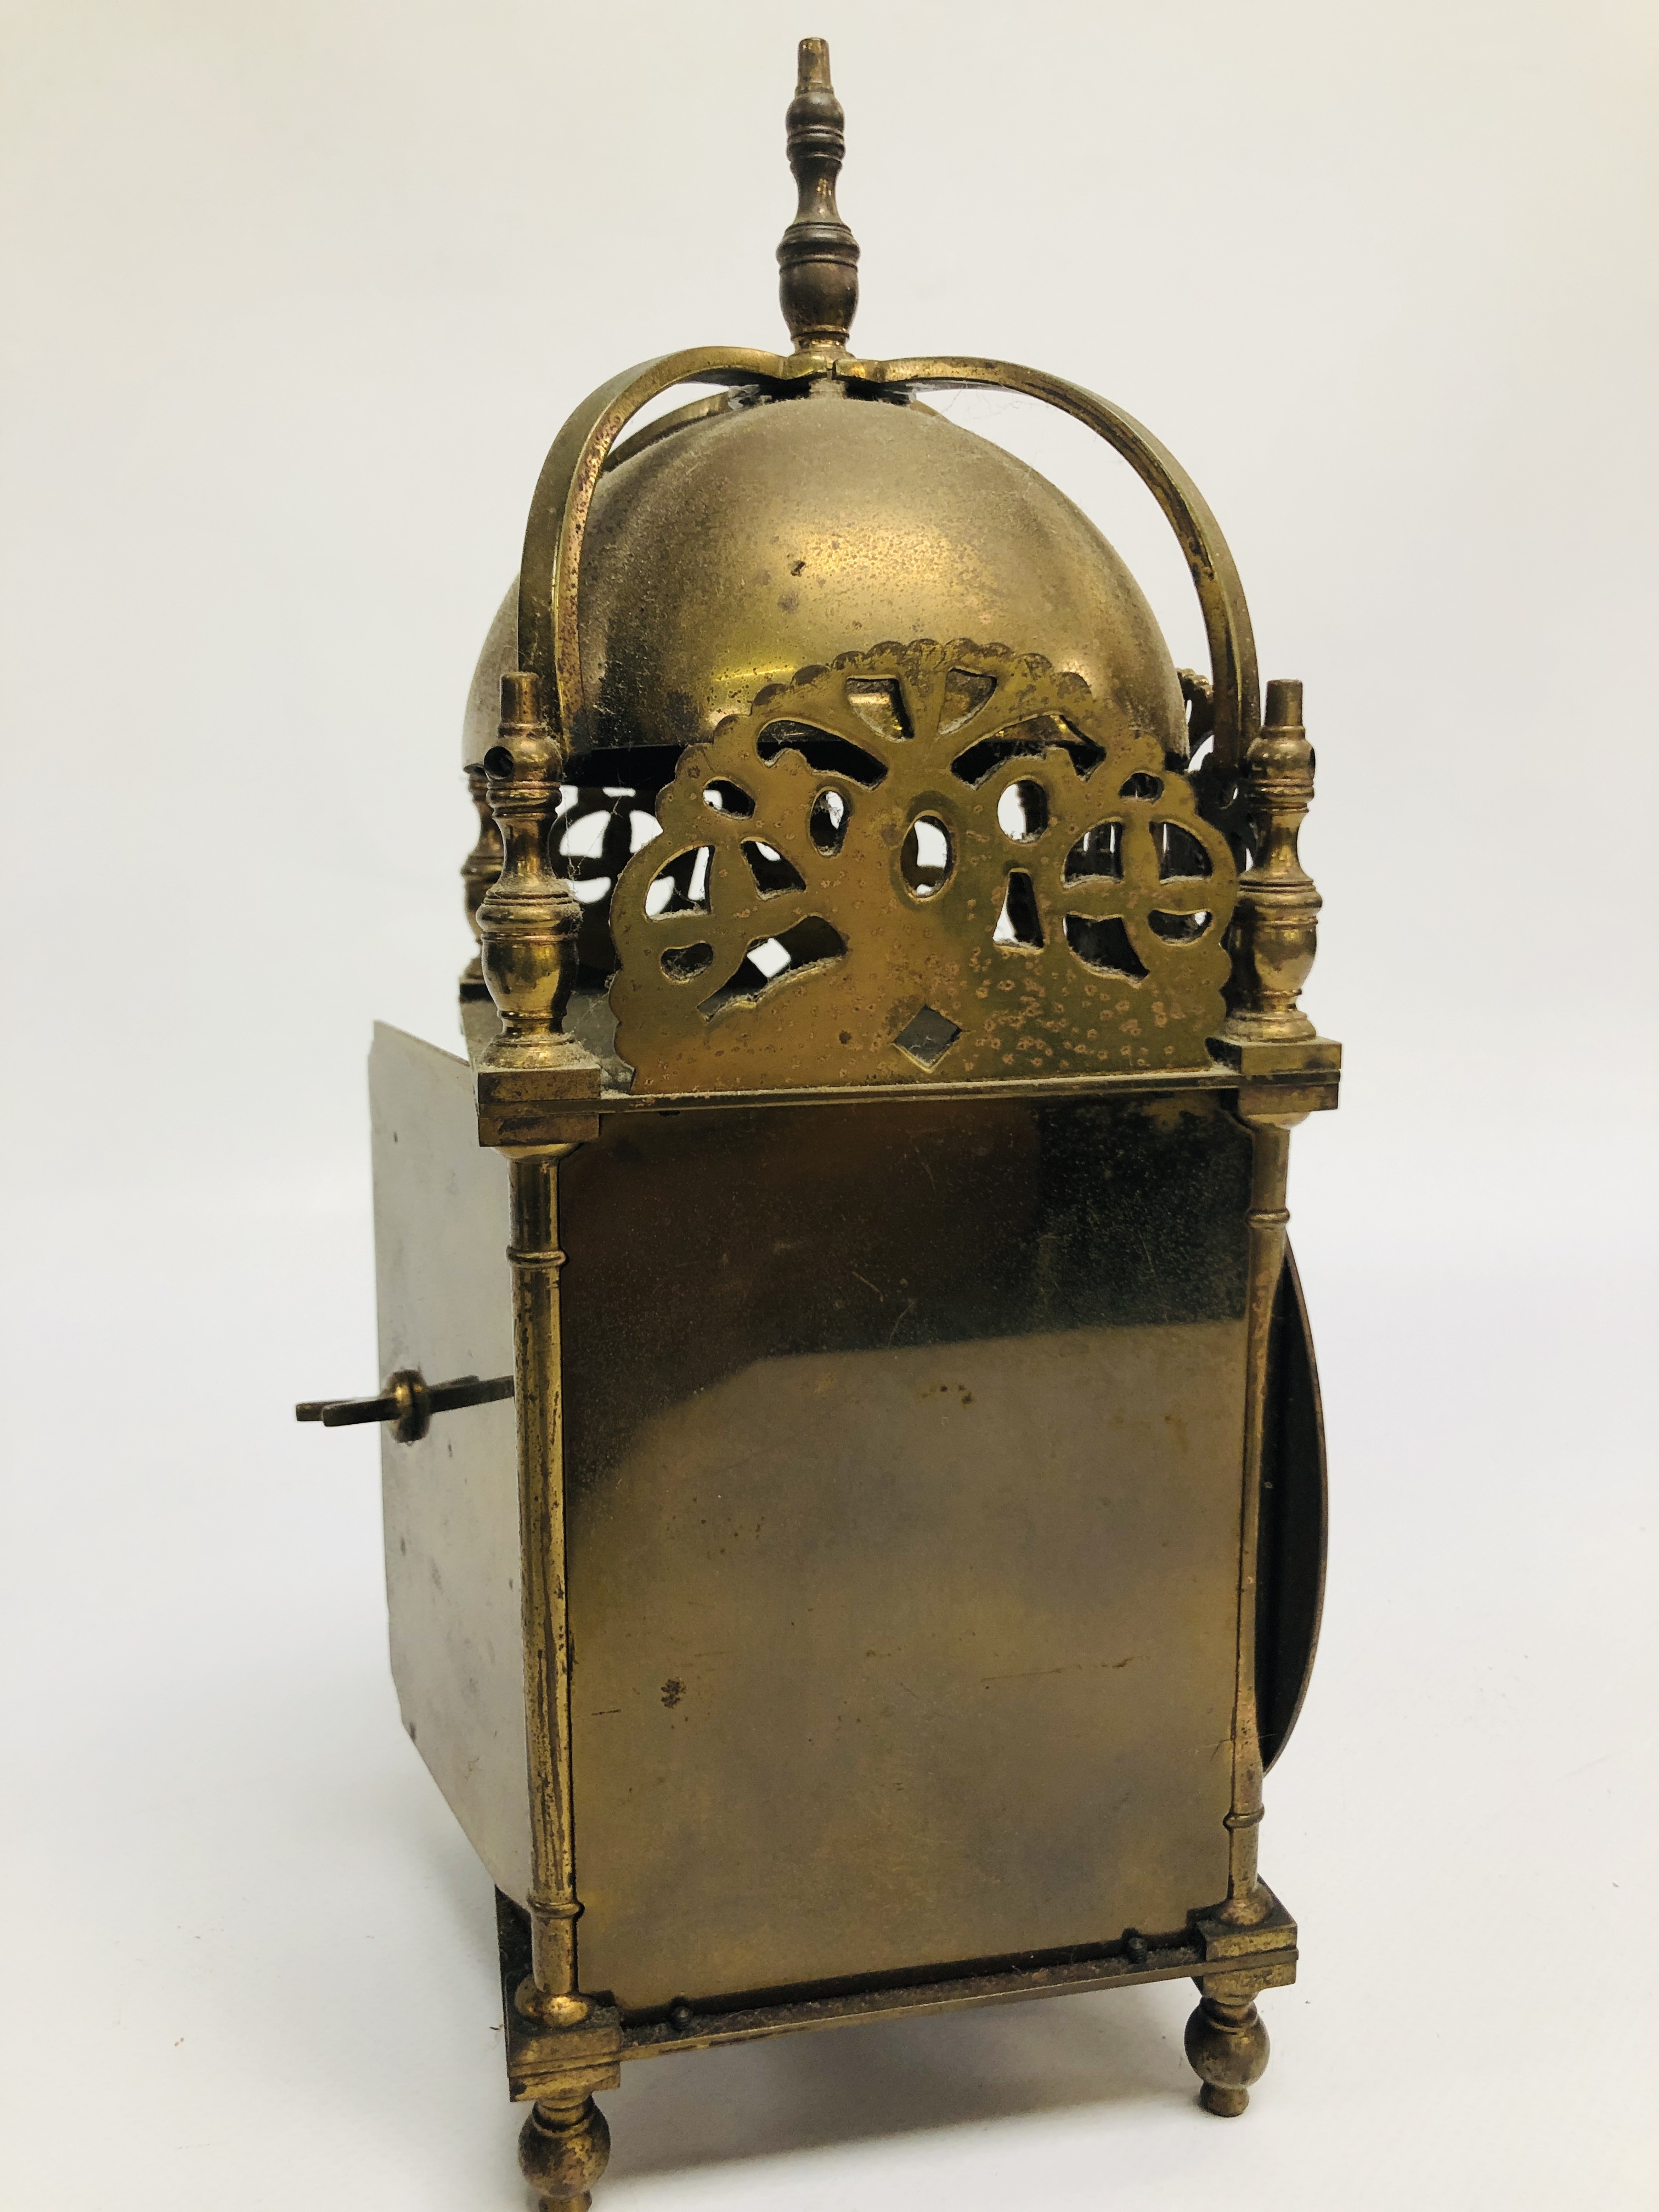 A FRENCH CARRIAGE CLOCK, THE FACE BEING PLASTIC + A MANTEL CLOCK OF LANTERN FORM. - Image 12 of 12